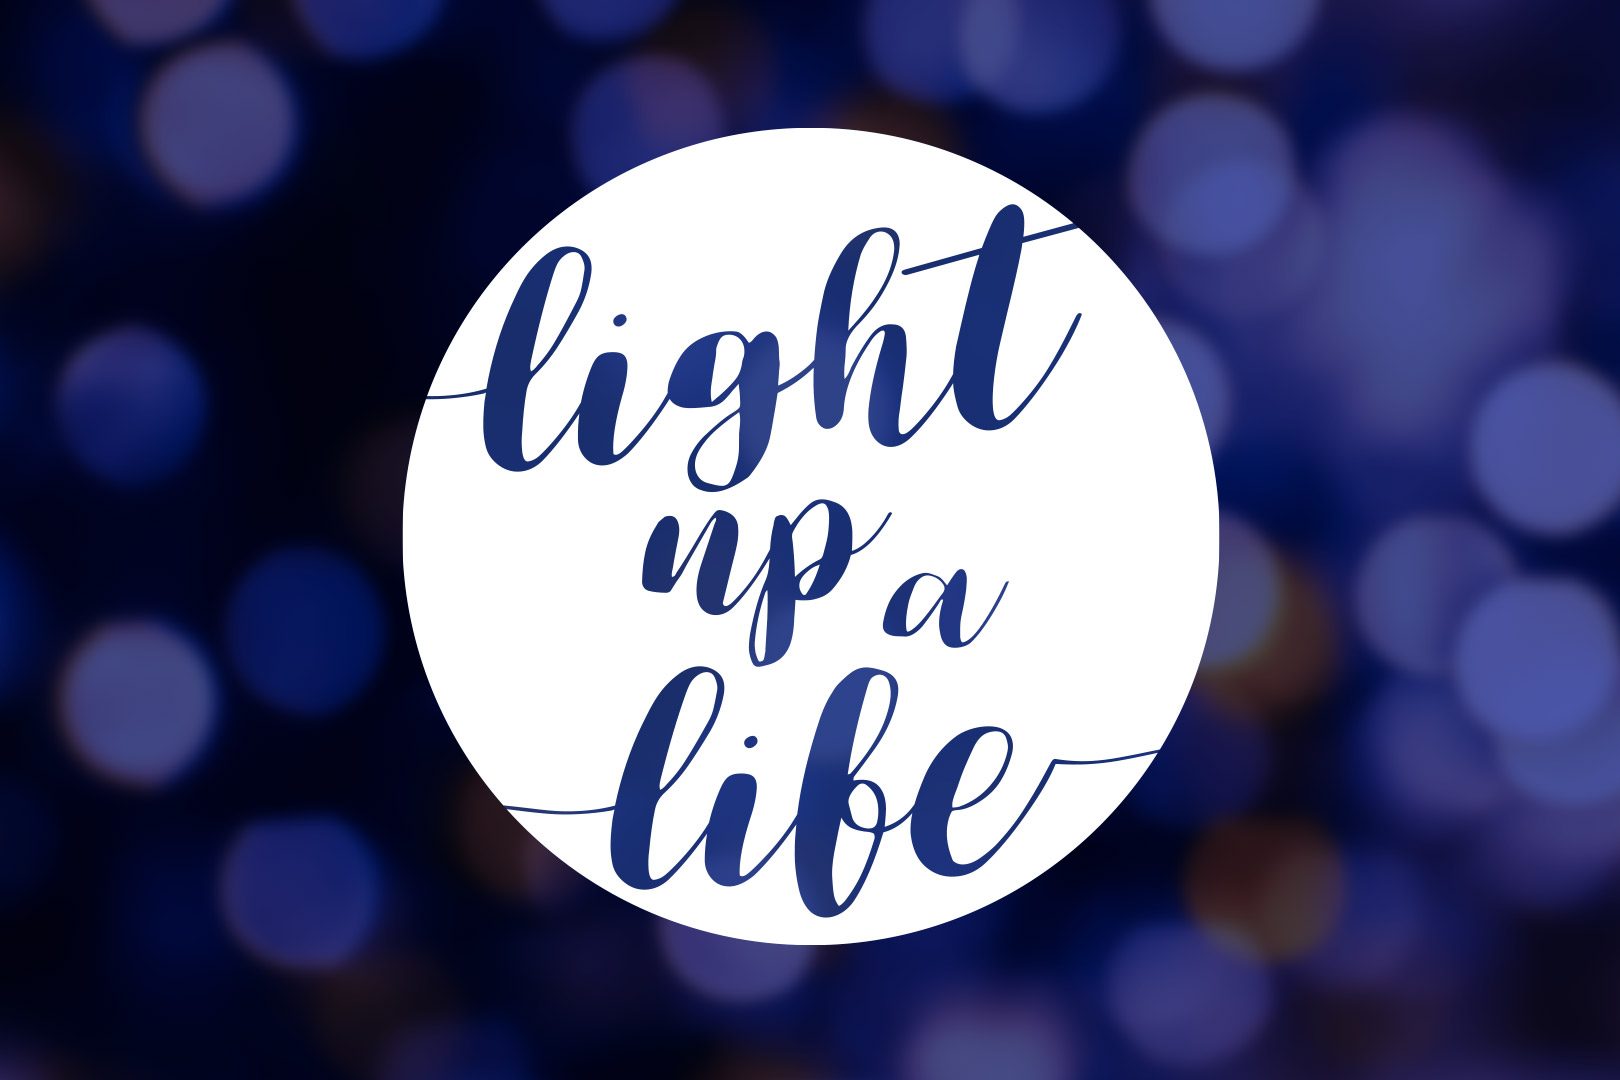 Nightingale House Hospice launch Light up a Life event online